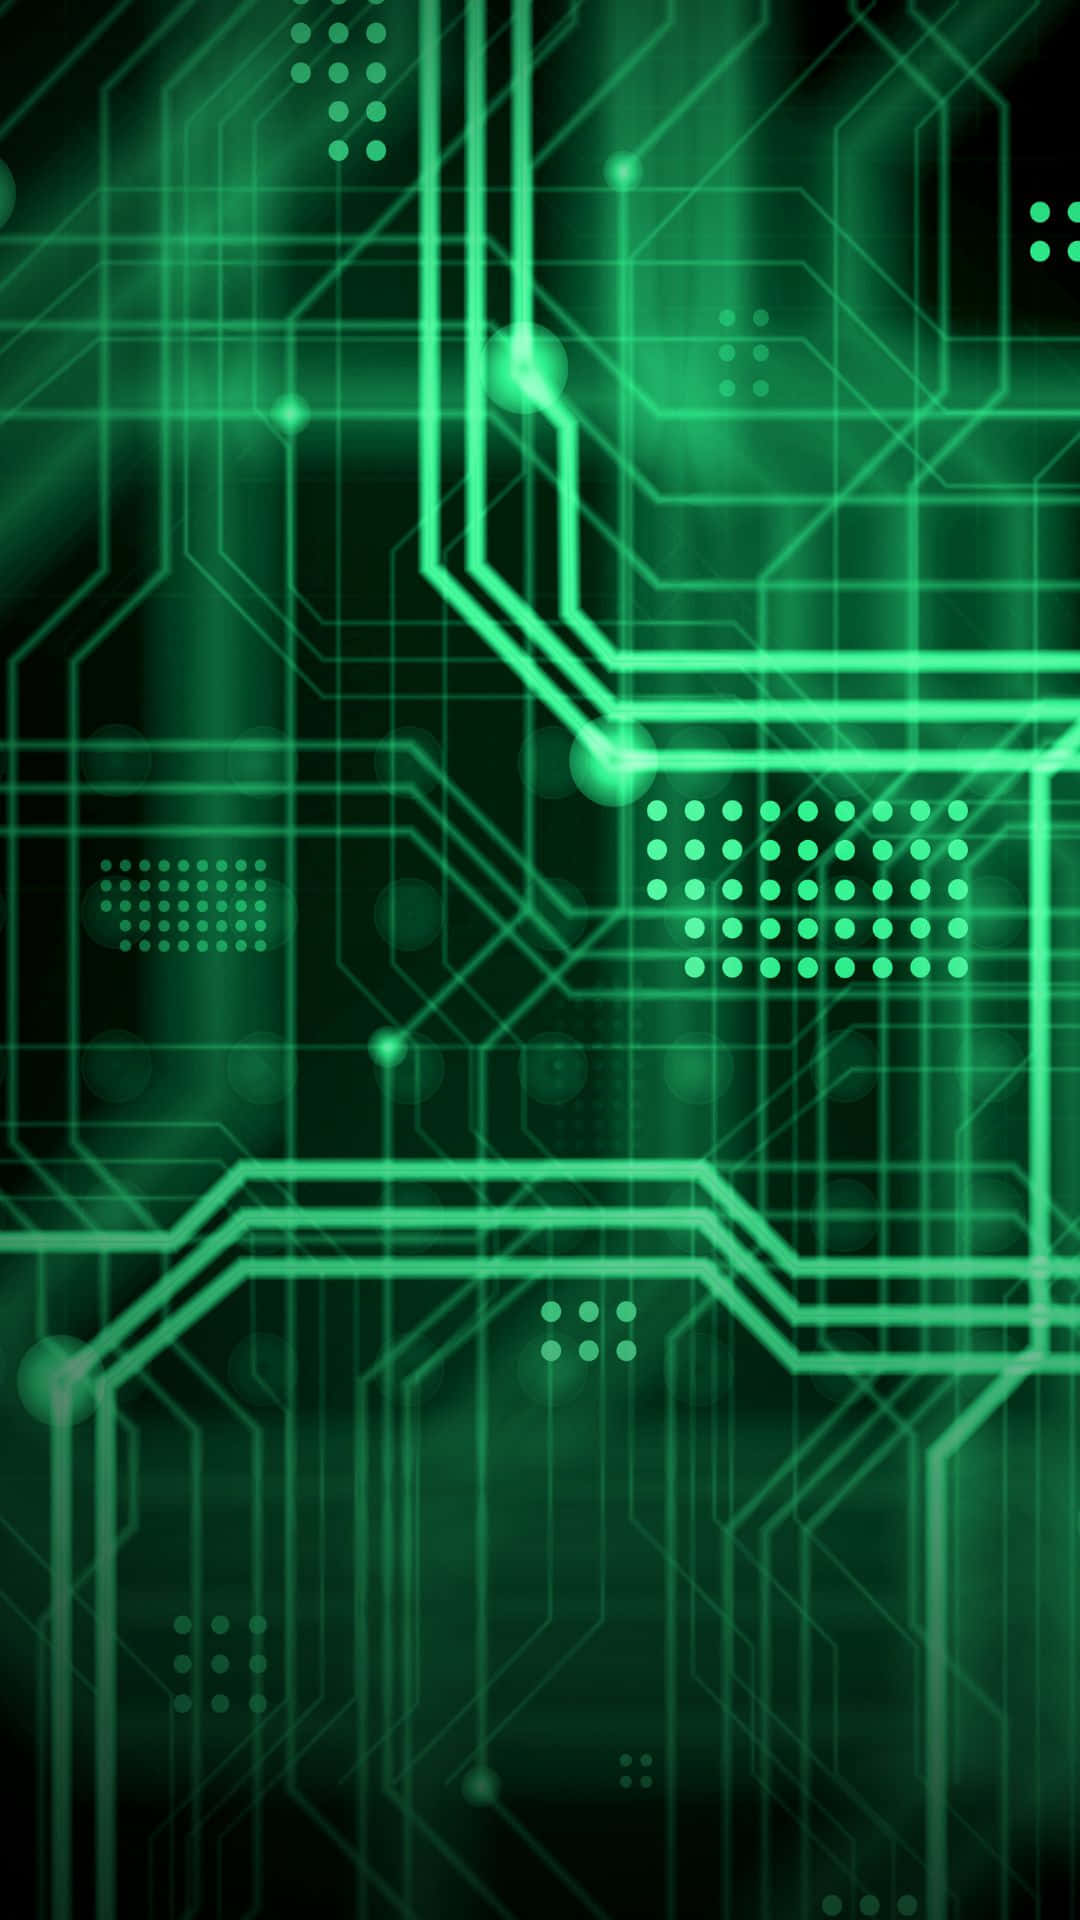 Abstract Circuit Board Background Wallpaper